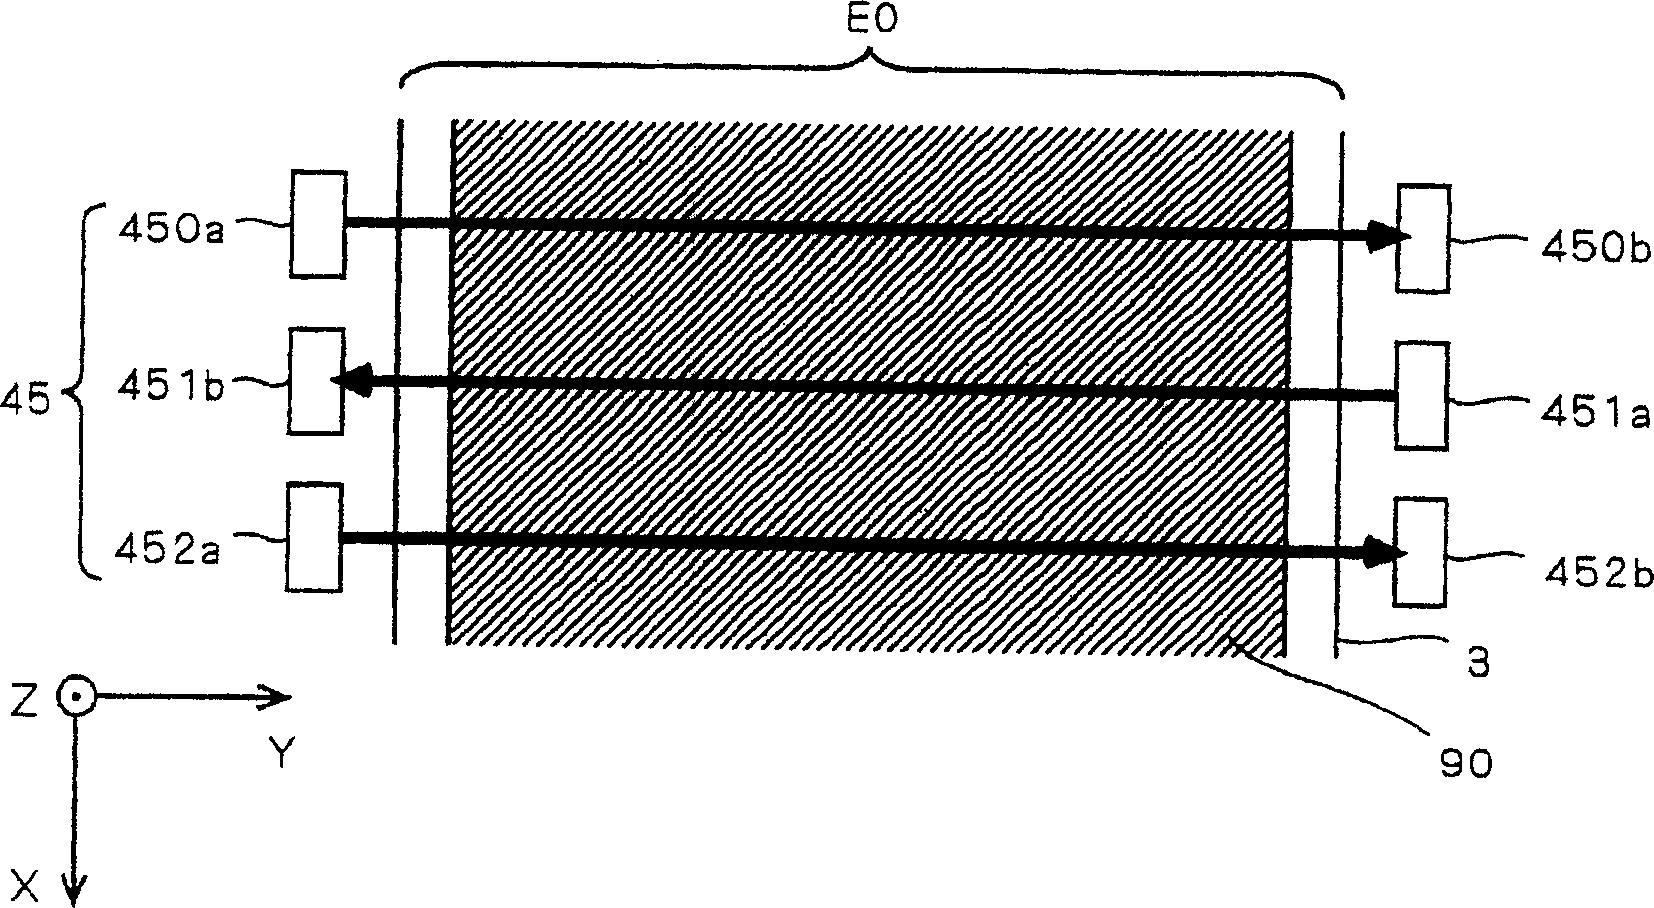 Base plate processing device